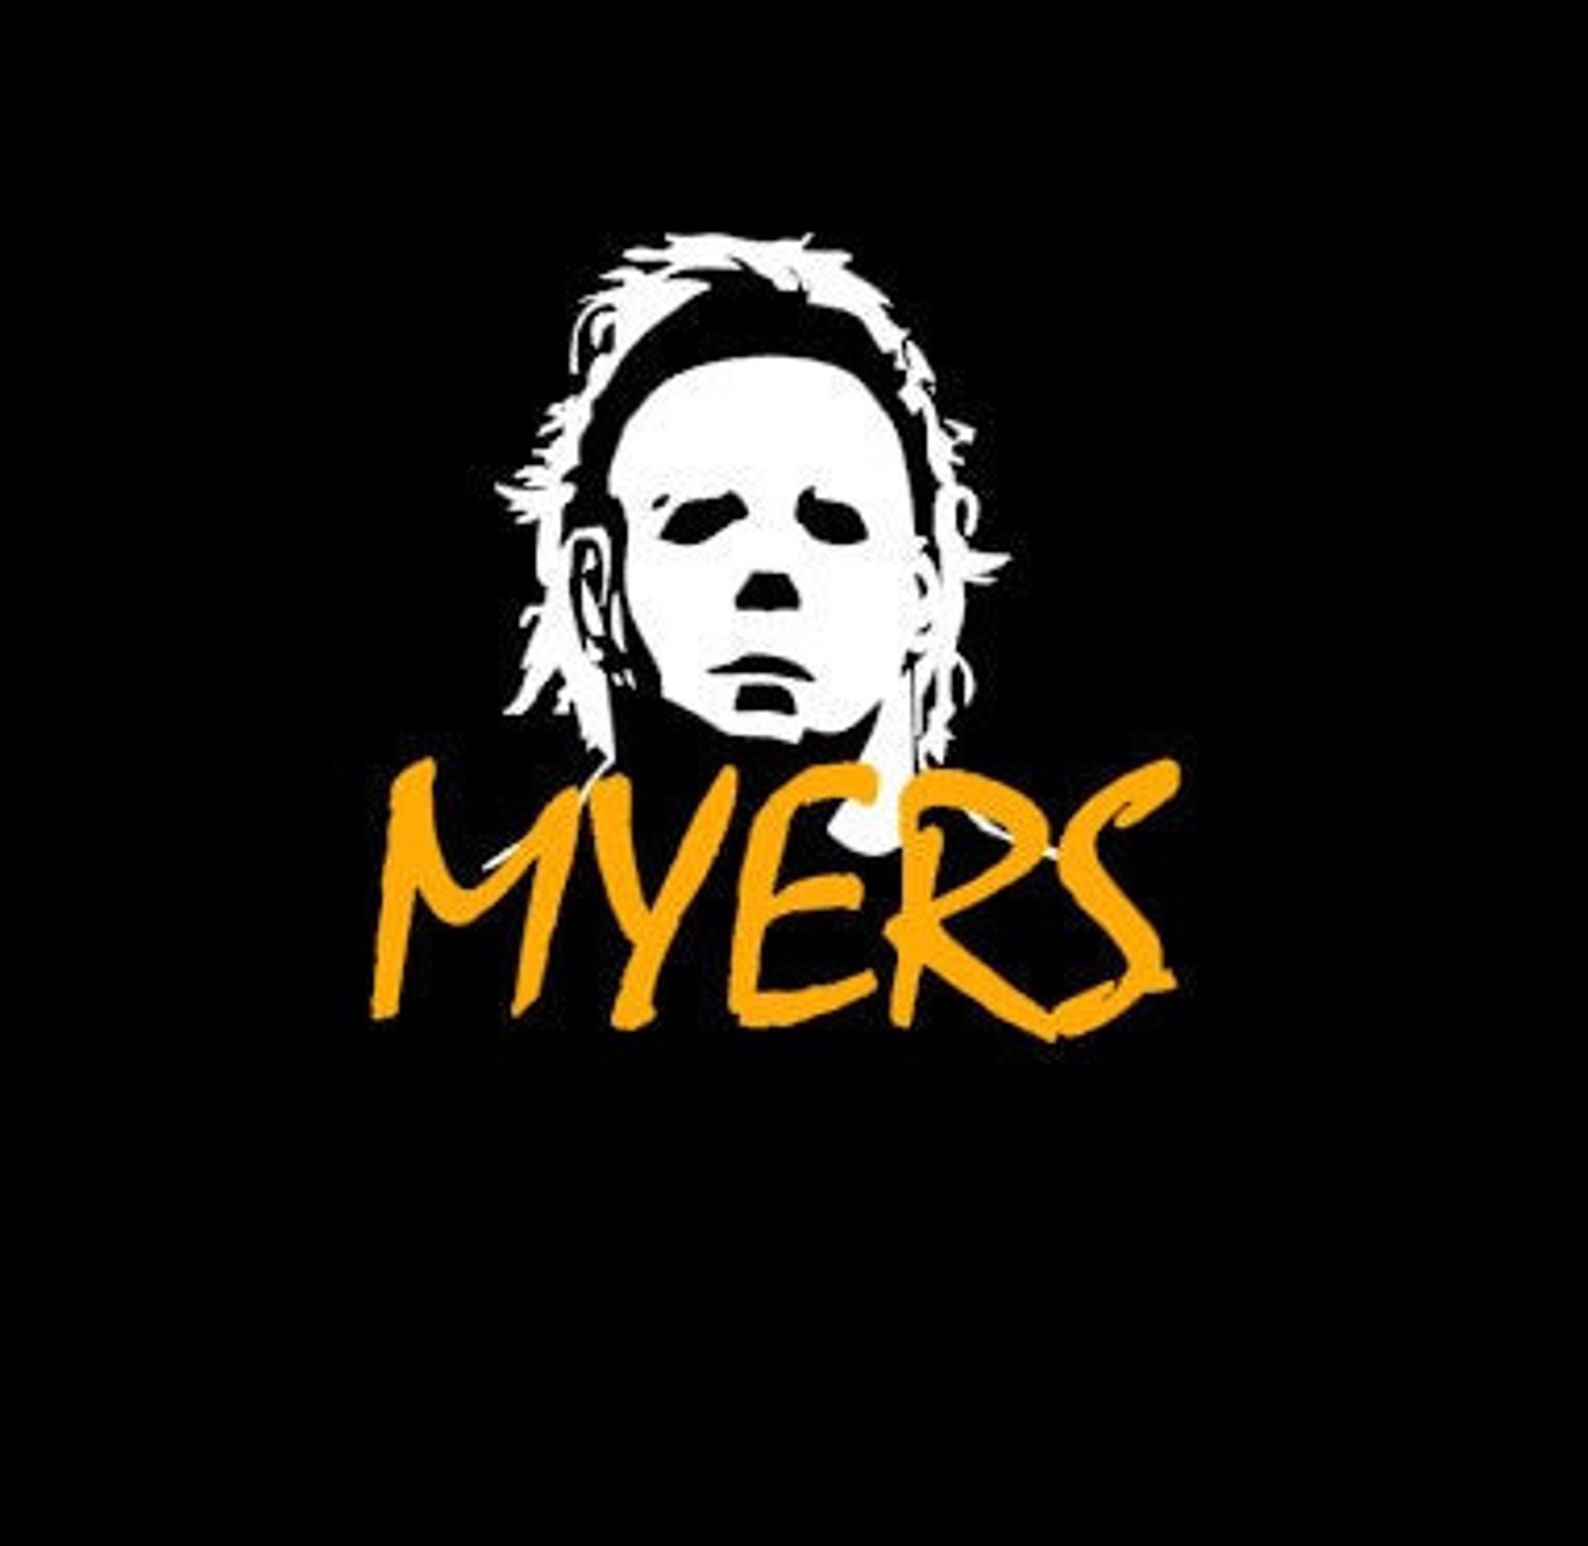 Michael Myers Decal / Halloween Decal / Car decal / LapTop | Etsy